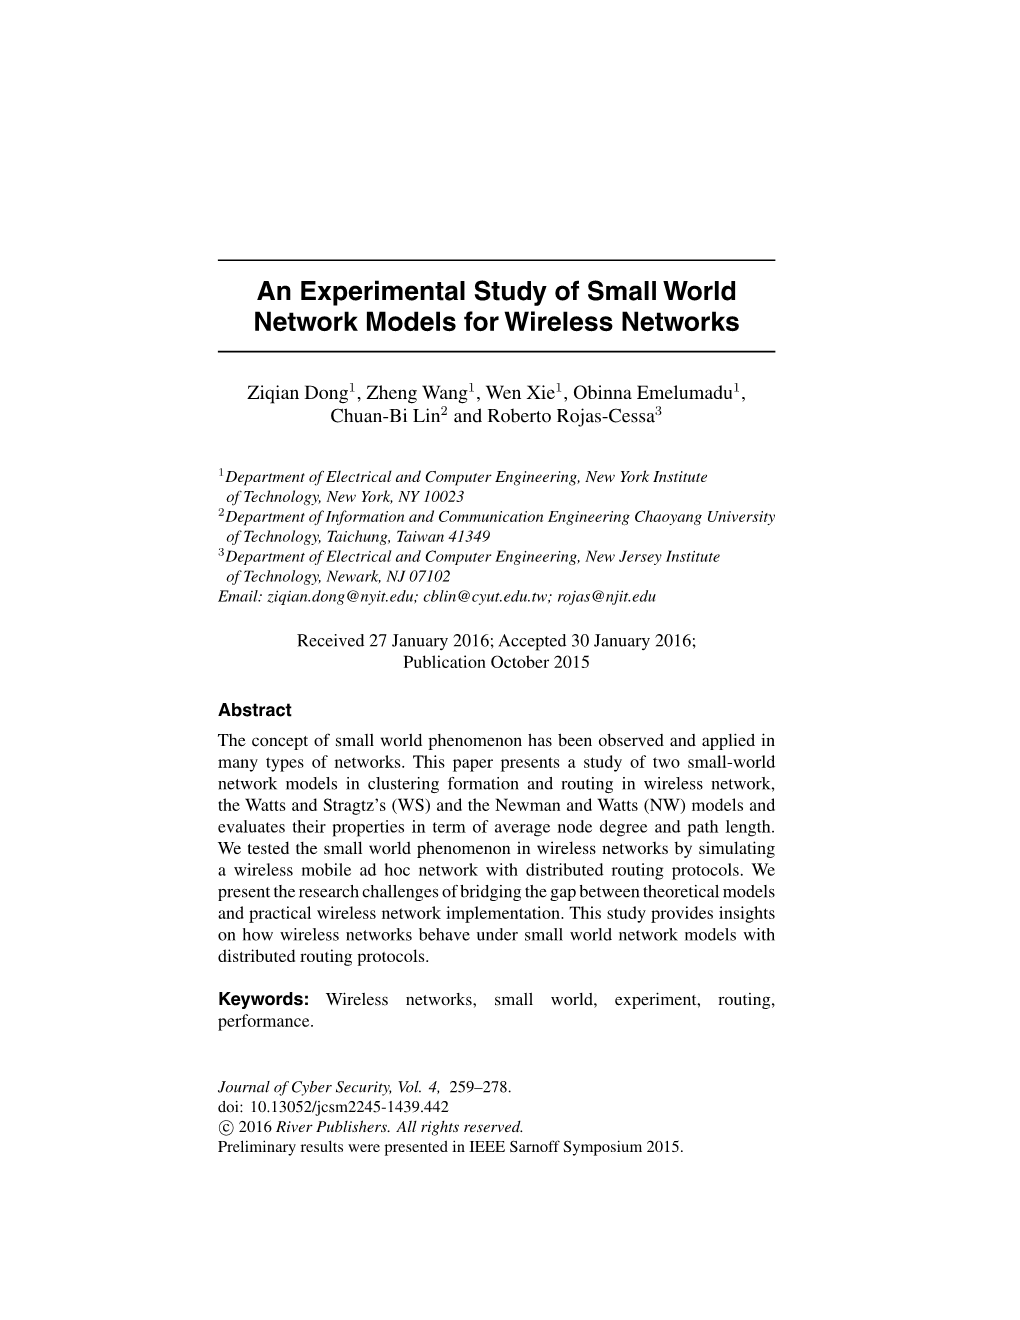 An Experimental Study of Small World Network Models for Wireless Networks